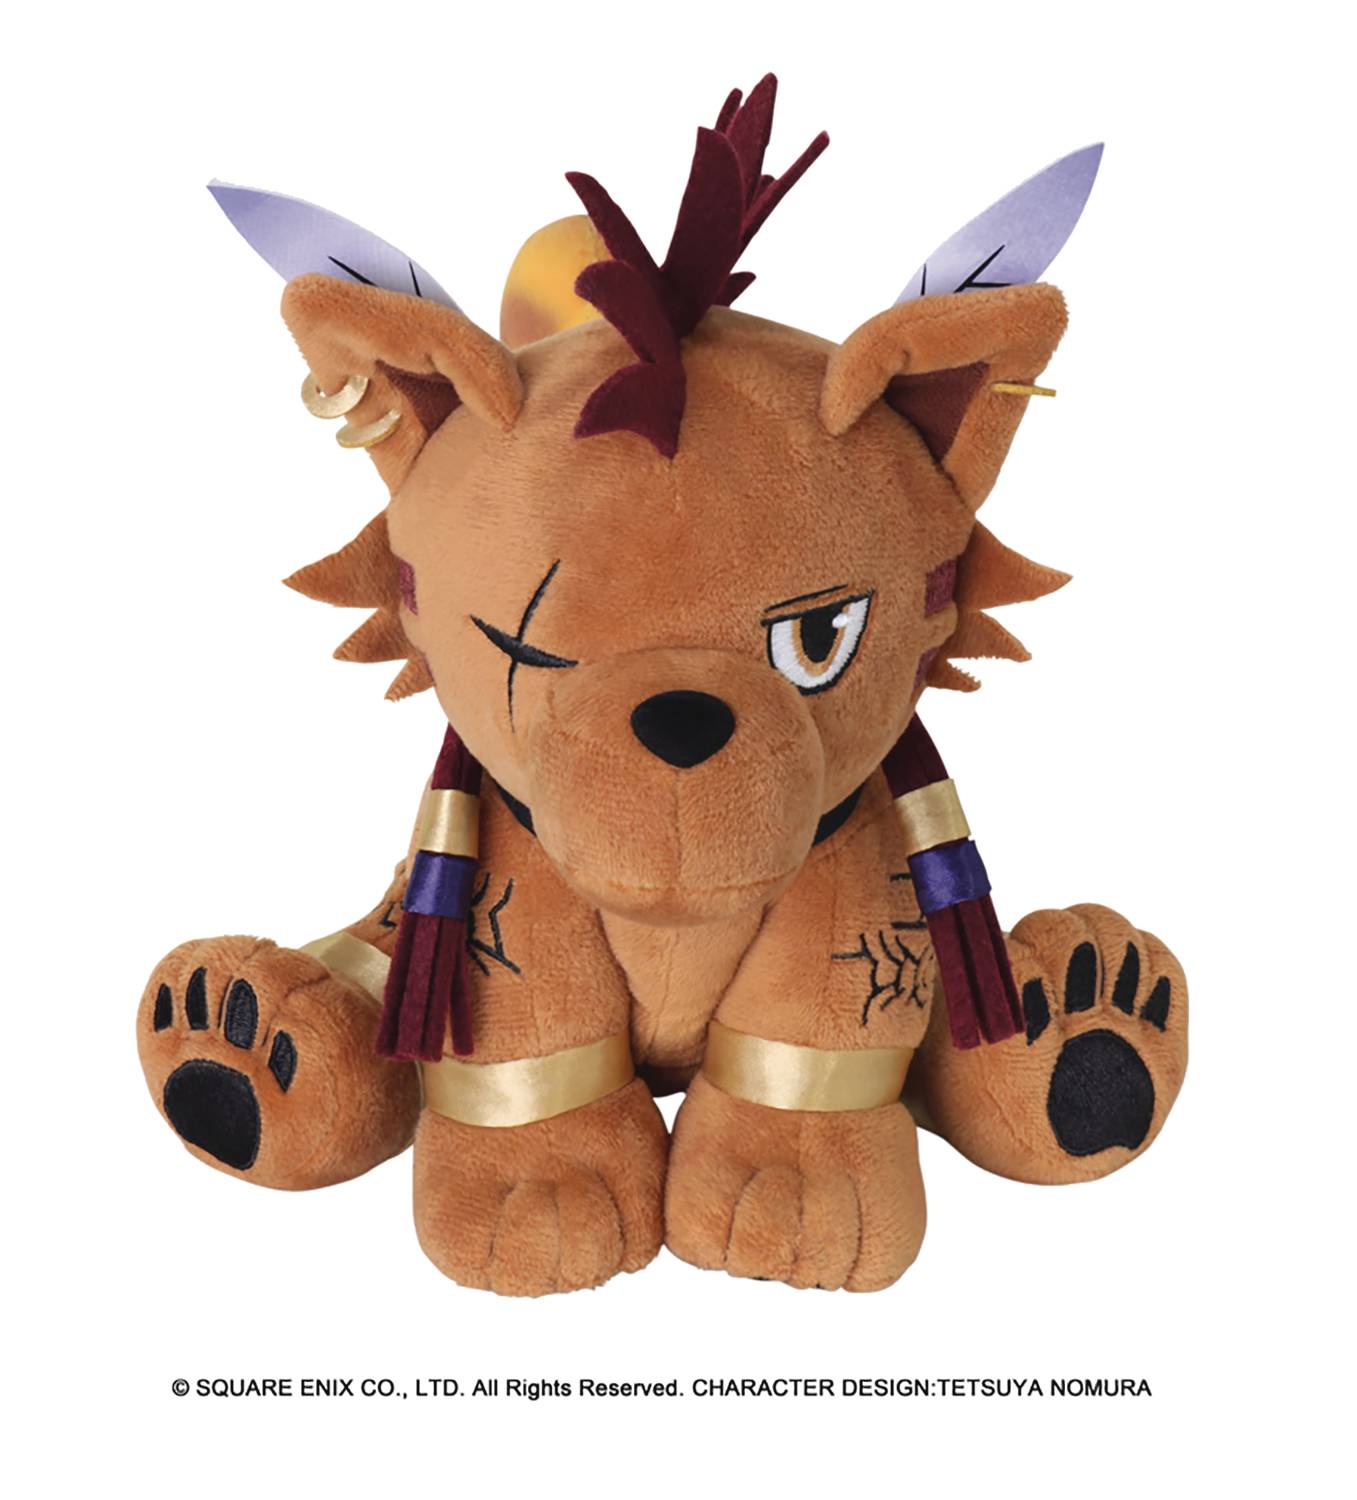 FINAL FANTASY VII RED XIII PLUSH ACTION DOLL